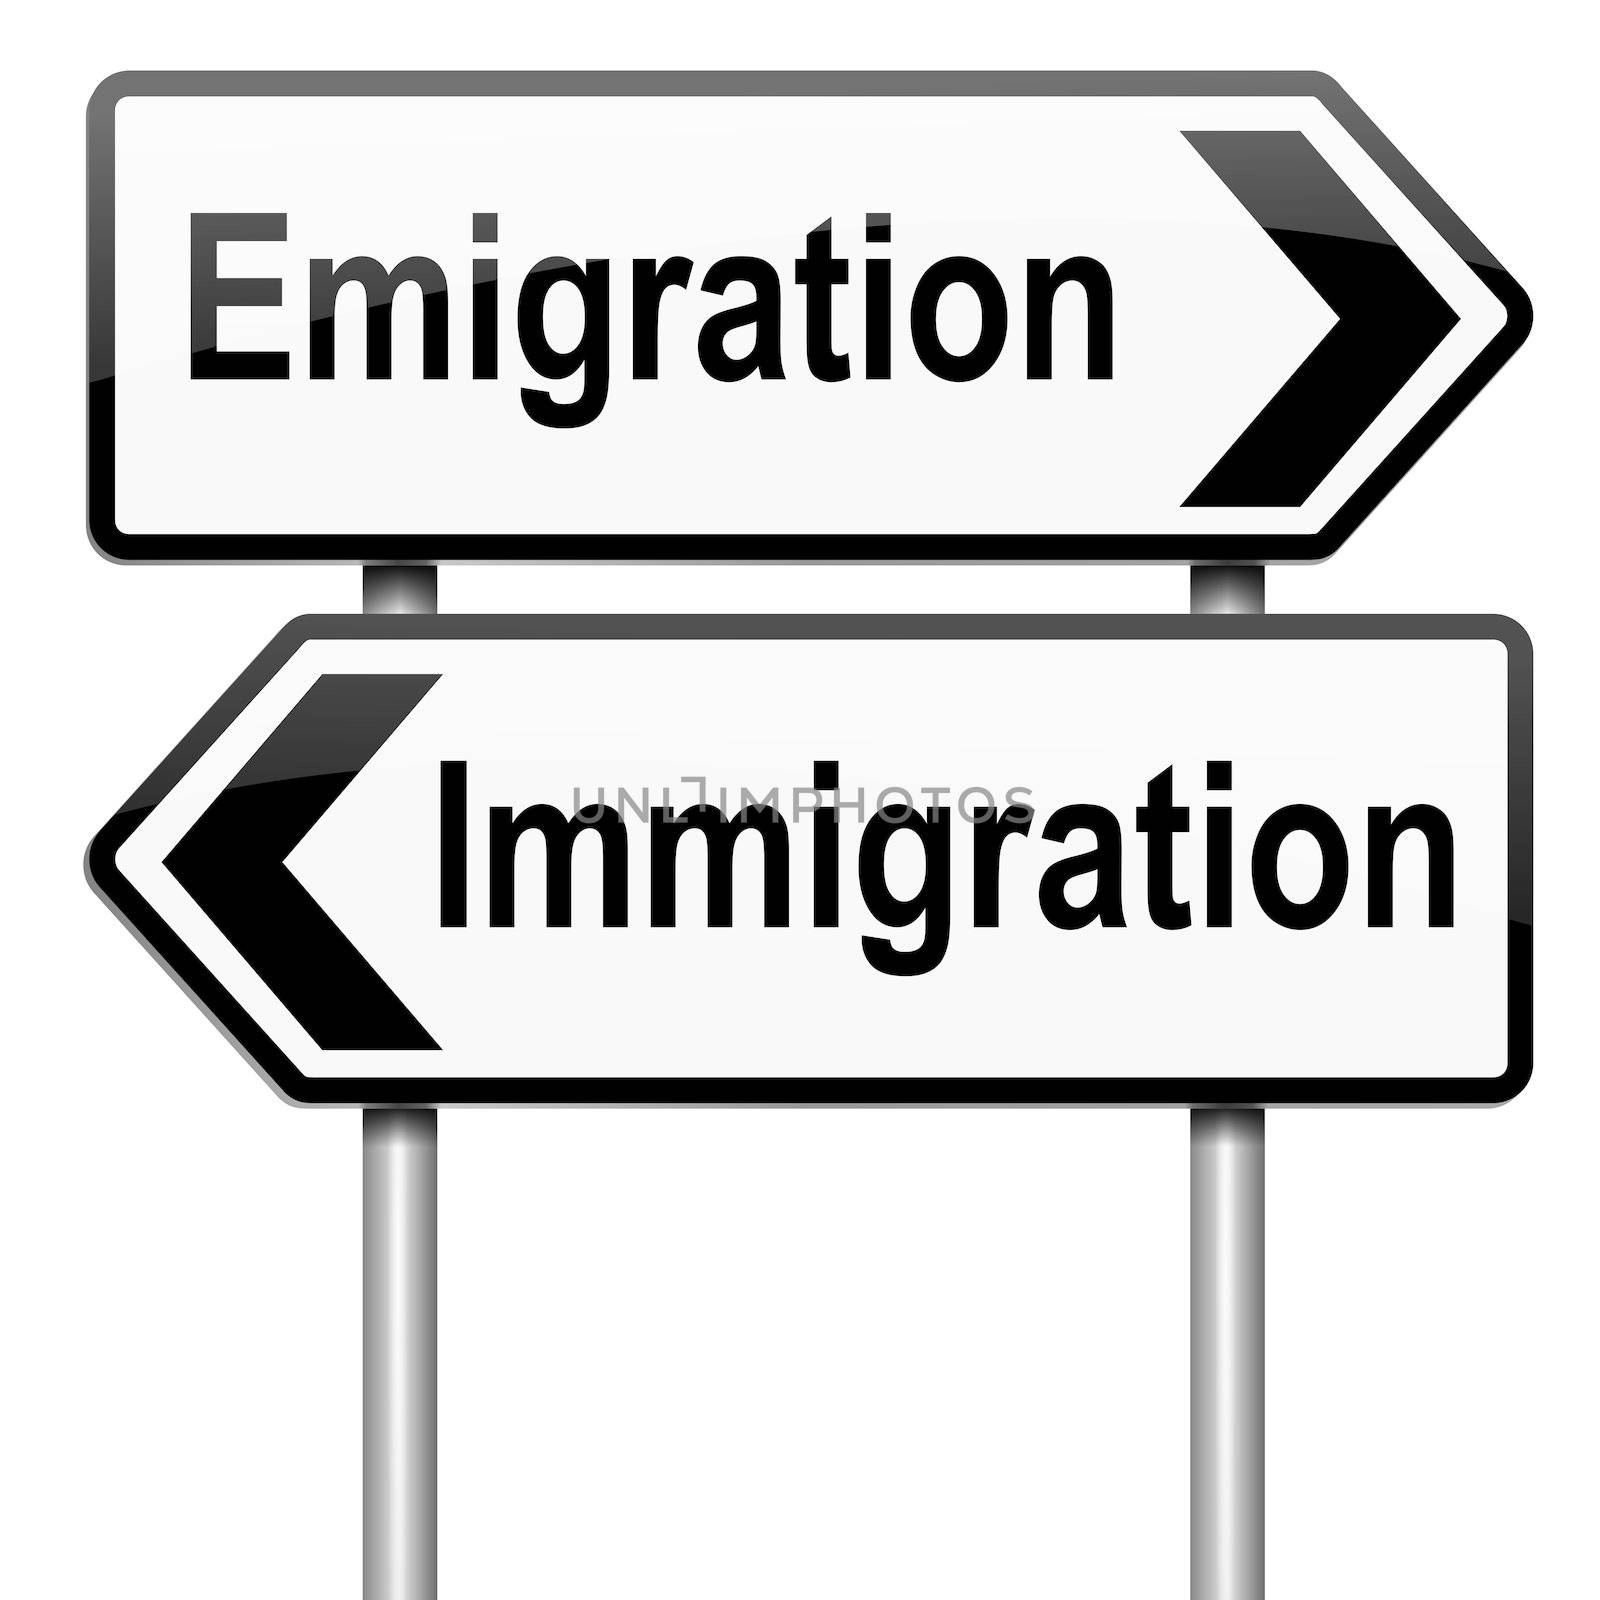 Illustration depicting a roadsign with an emigration or immigration concept. White background.